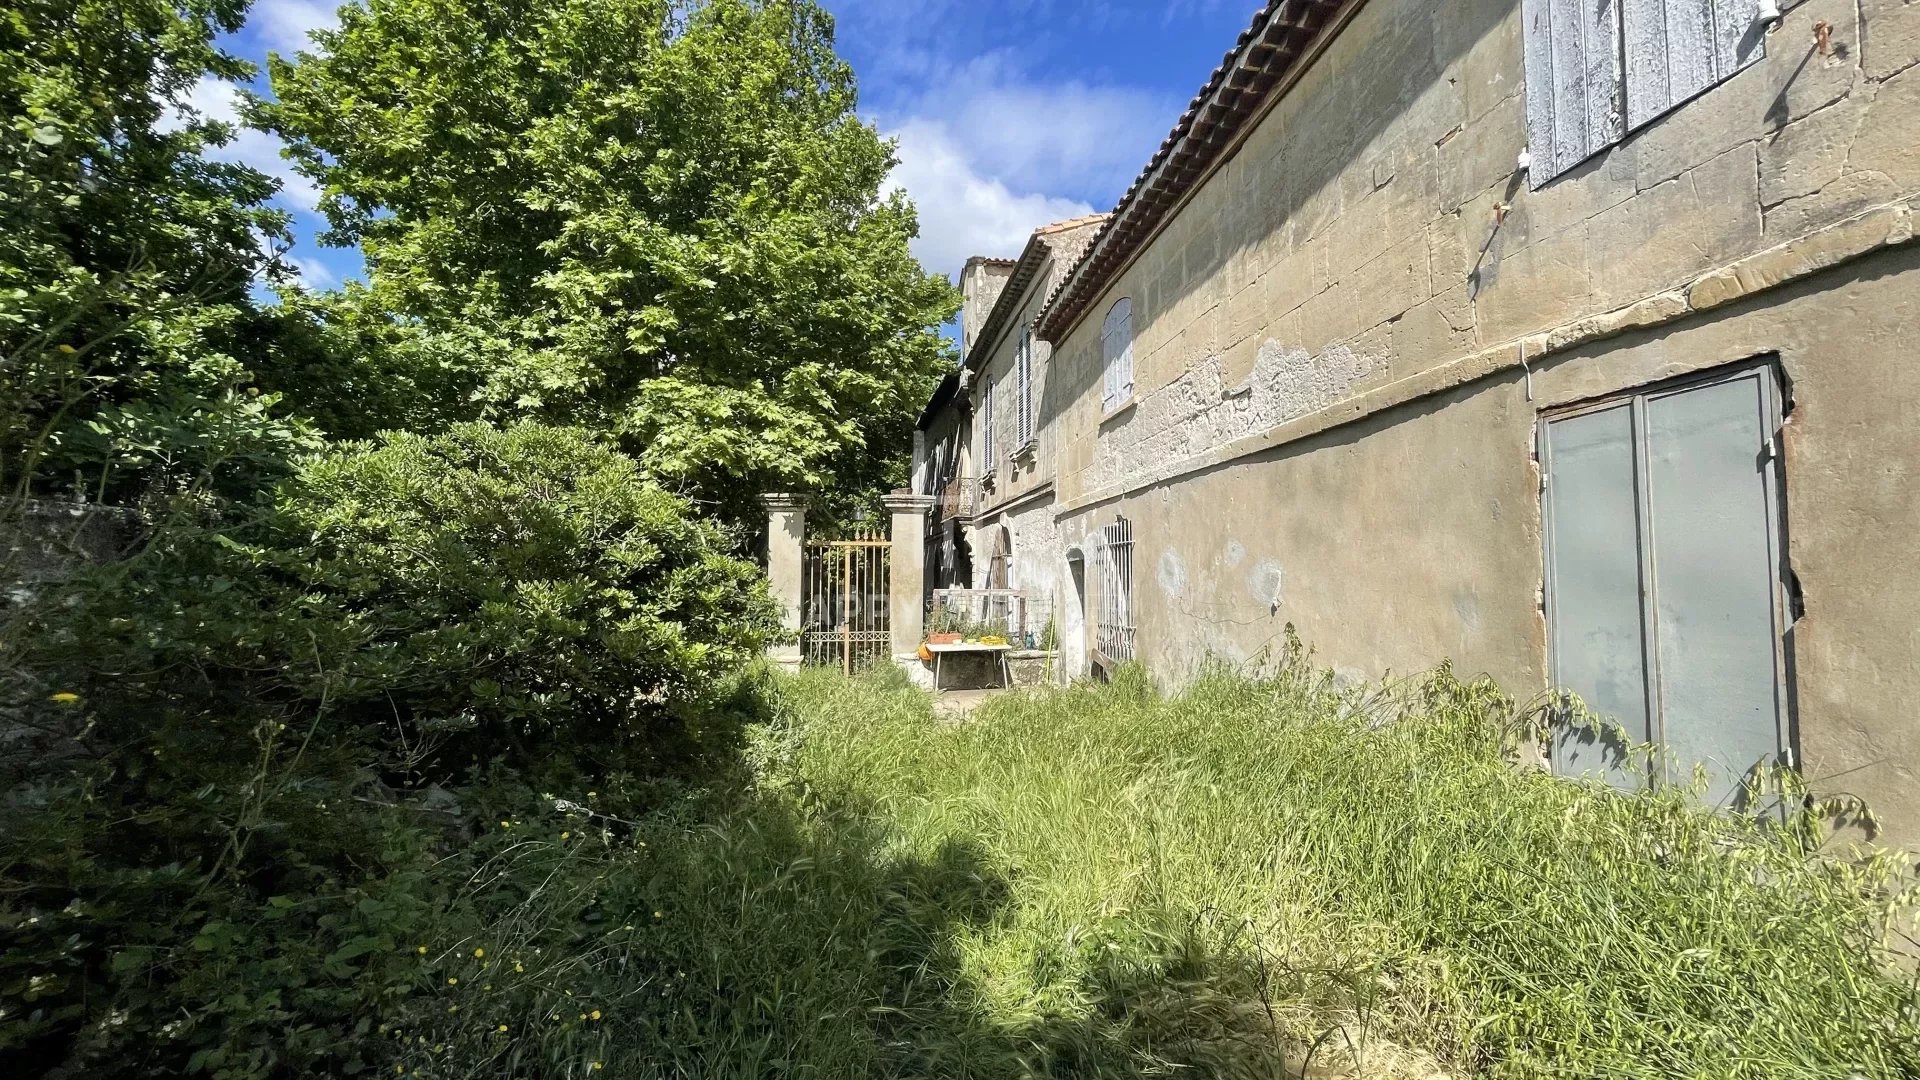 Property to restore with its outbuildings